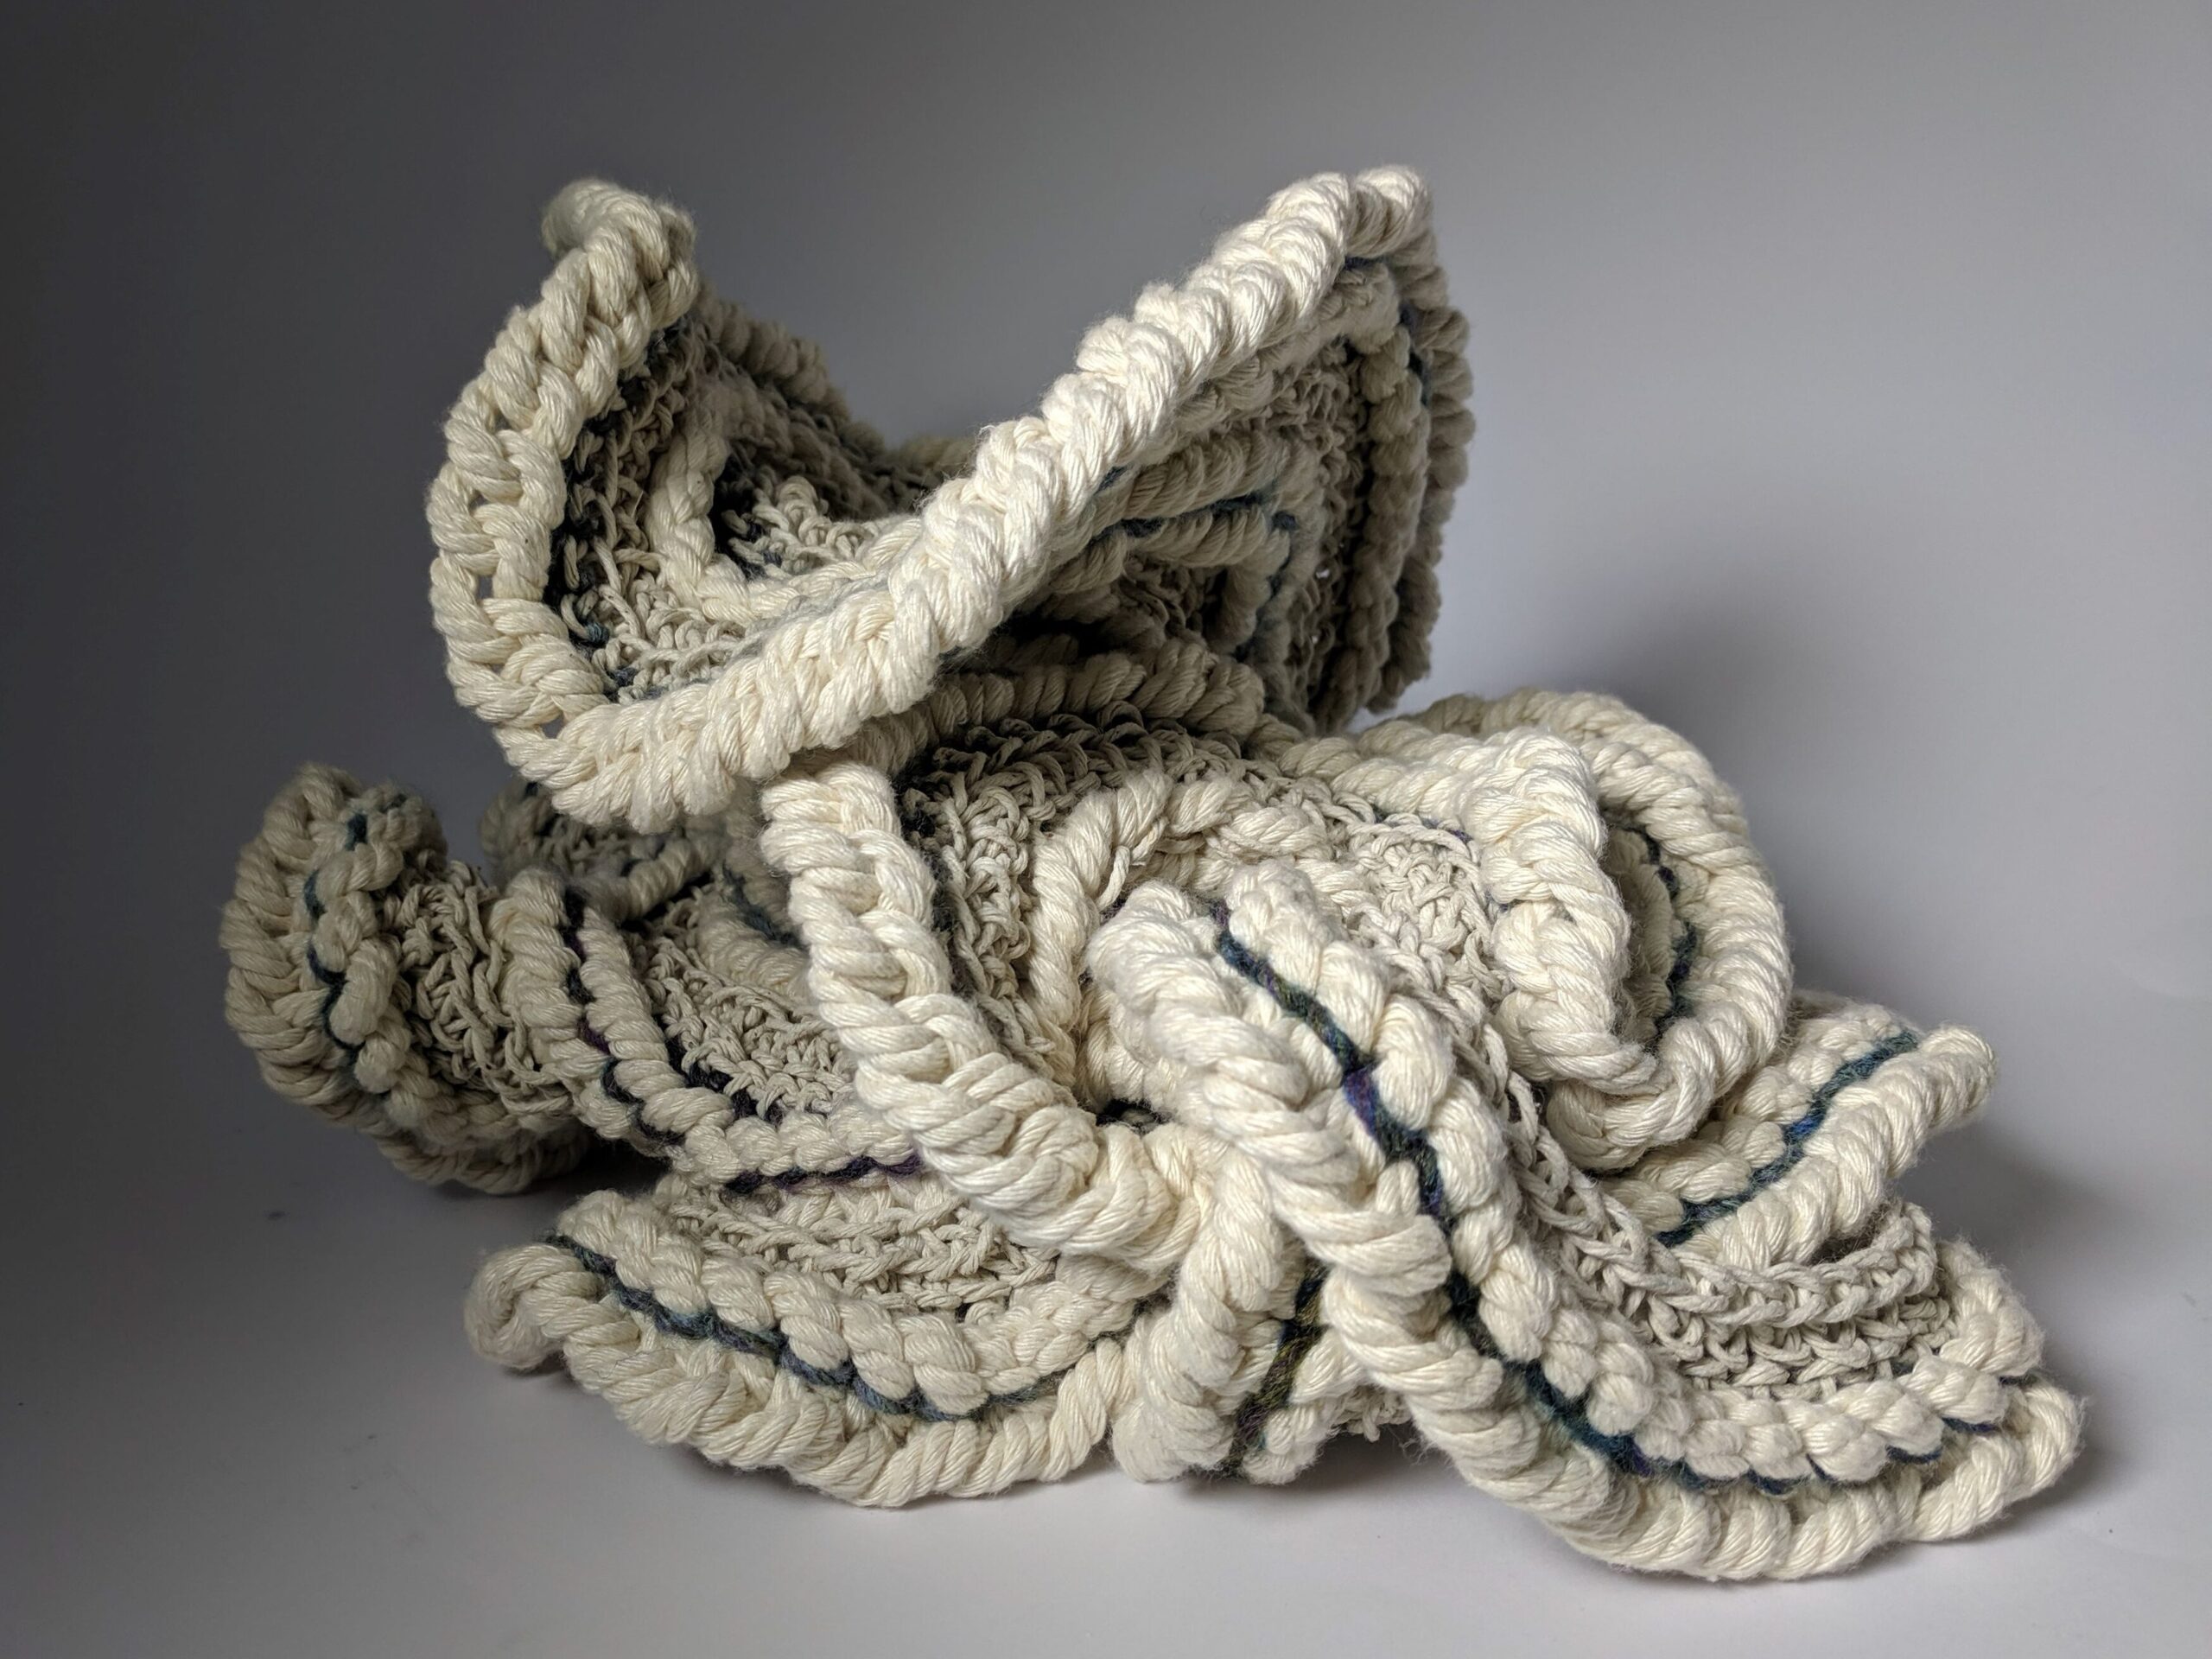 Hyperbolic crochet of different cord widths, piled together to create a maquette of a free-standing sculpture. 